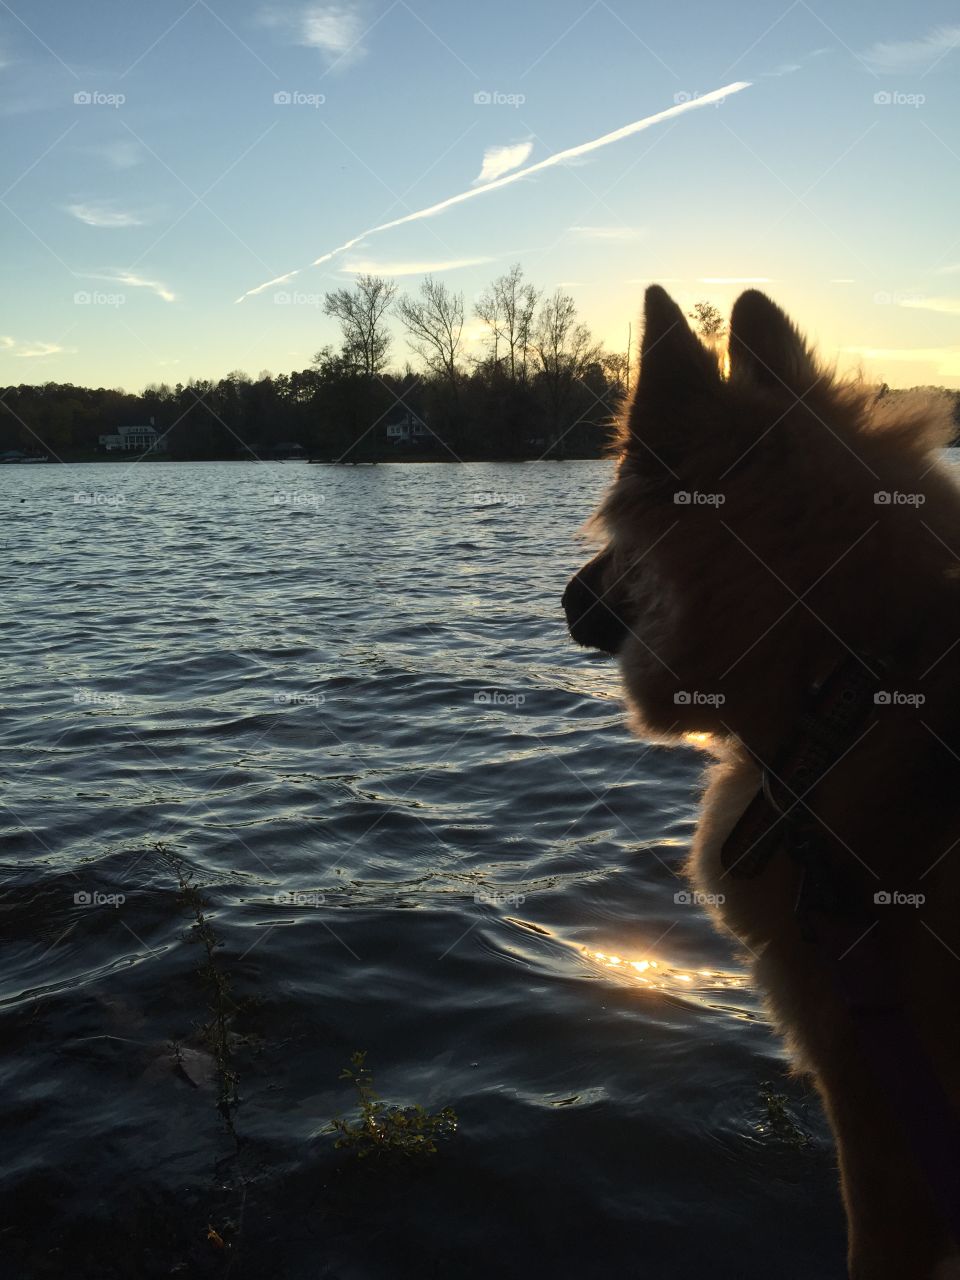 Looking out over the lake